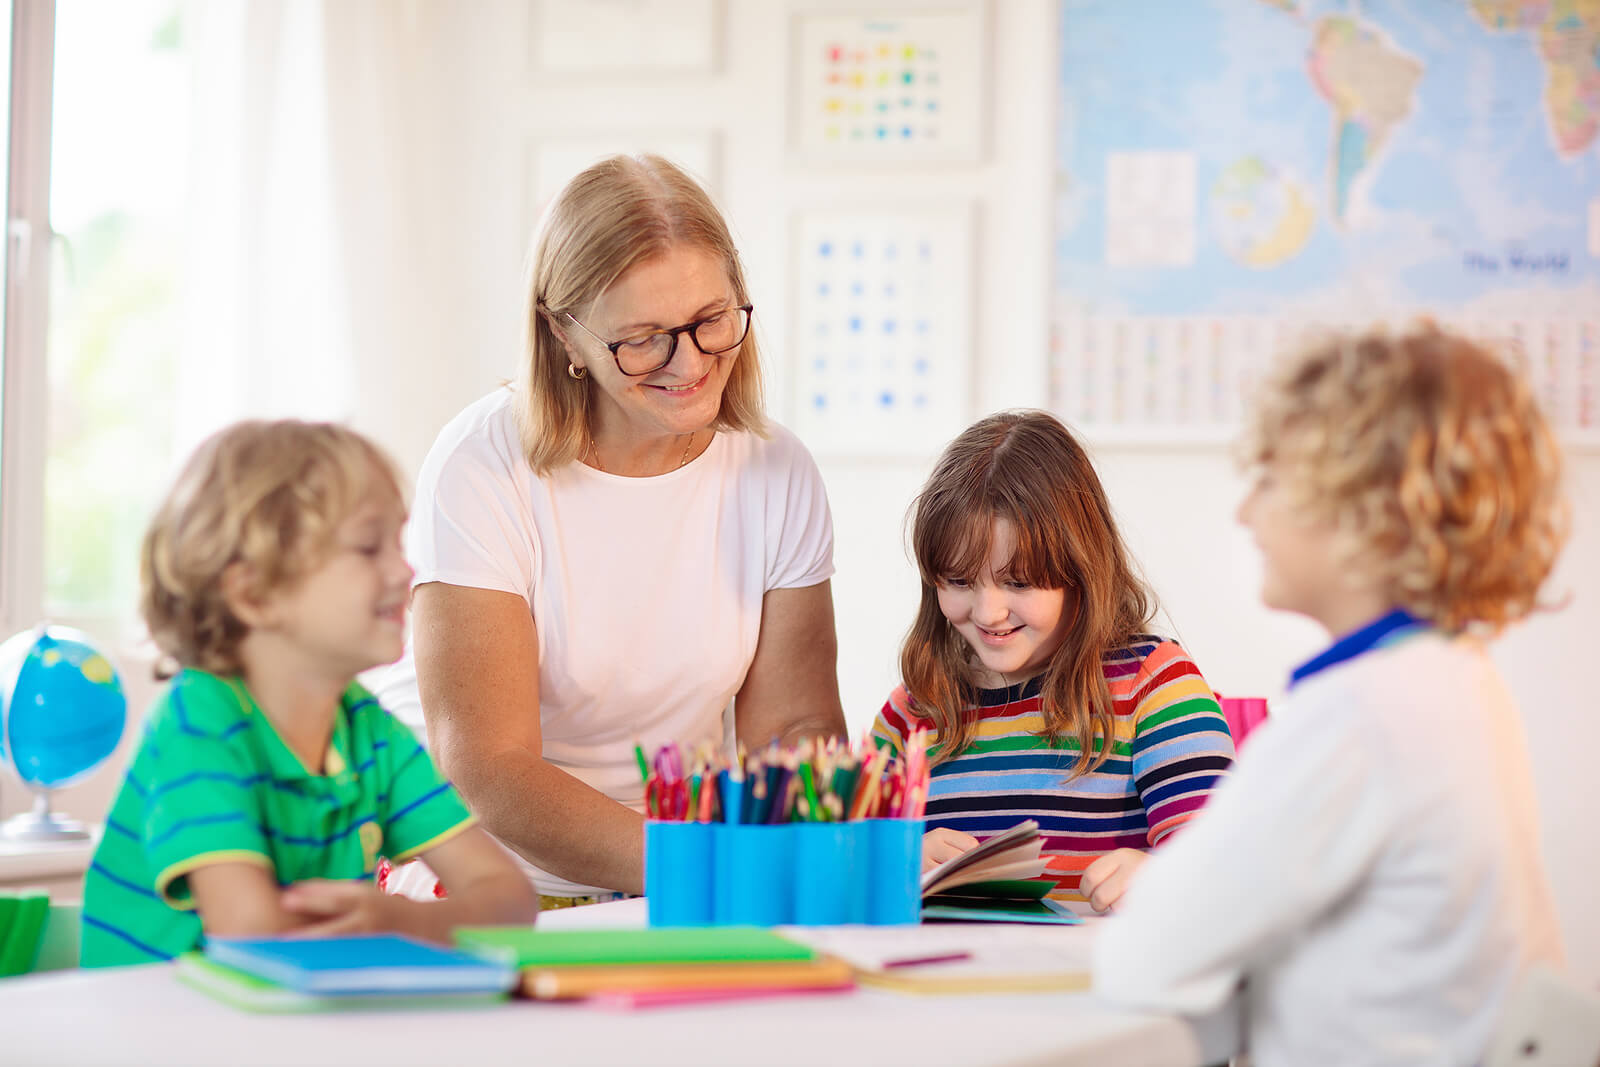 Image of a woman reading a book in a classroom to children. Does your child struggle academically? Learn how child neuropsych testing in Saint Petersburg, FL can help them find the support they need.